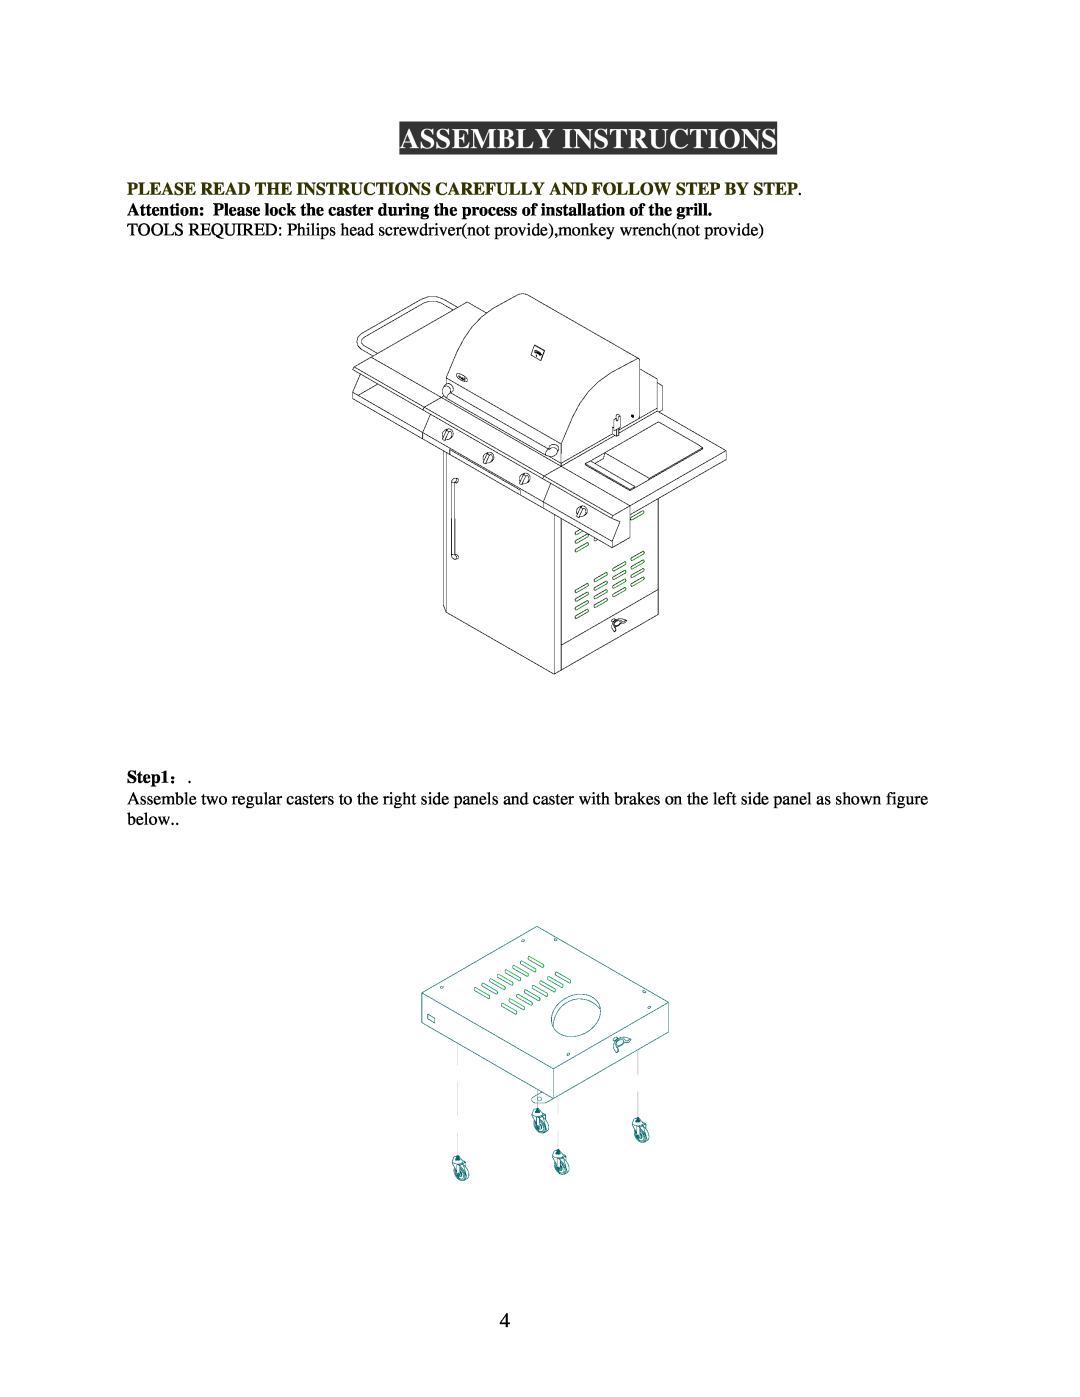 Nexgrill 720-0125-LP manual Assembly Instructions, Please Read The Instructions Carefully And Follow Step By Step, ： 